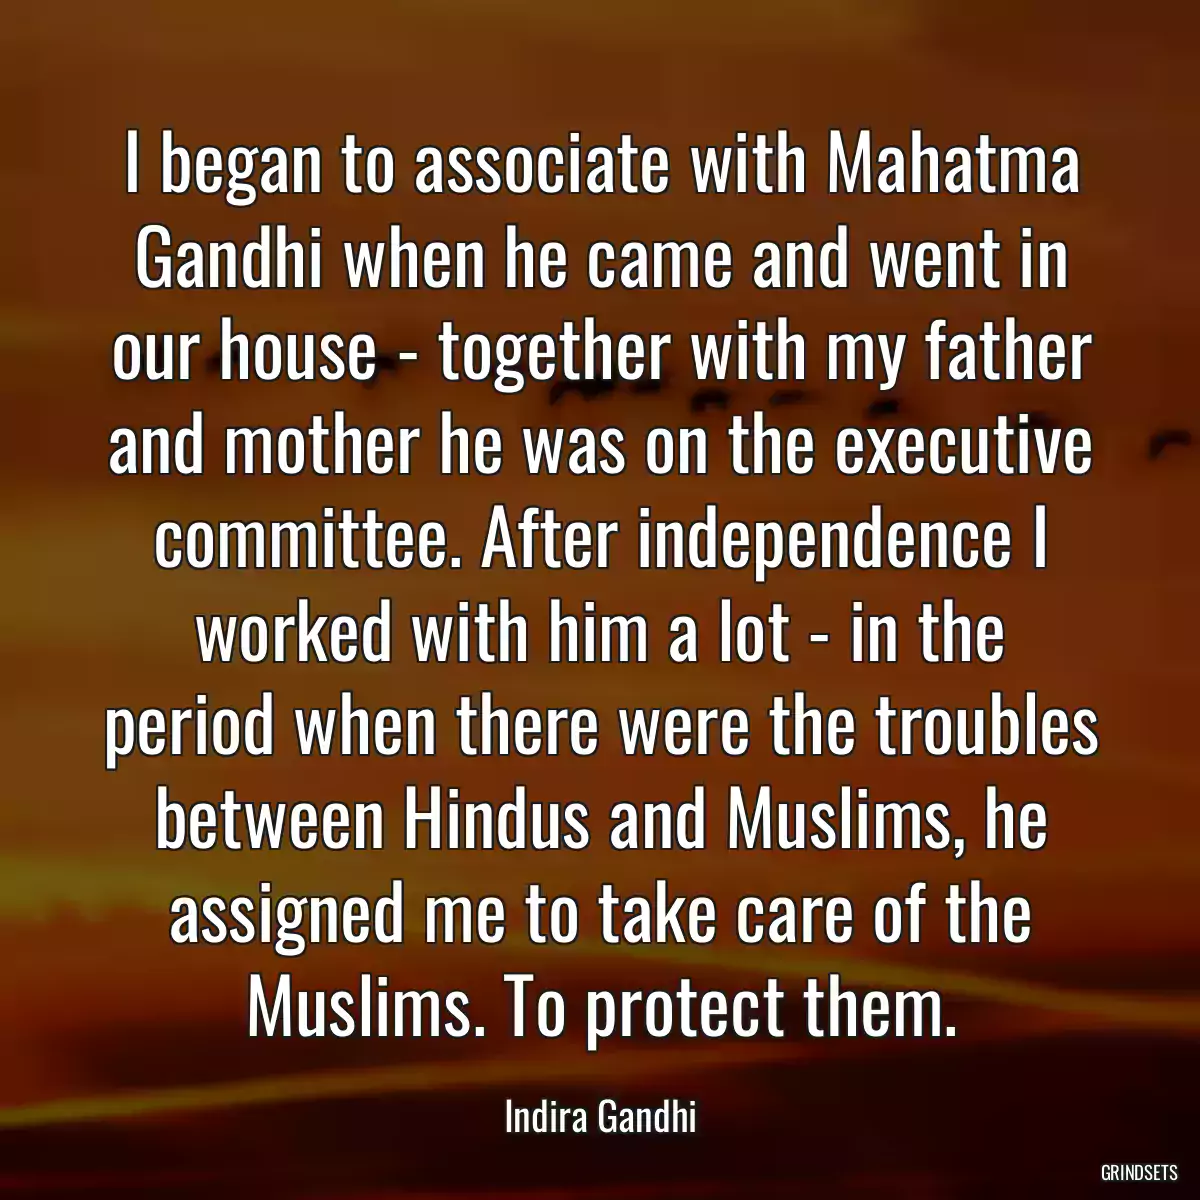 I began to associate with Mahatma Gandhi when he came and went in our house - together with my father and mother he was on the executive committee. After independence I worked with him a lot - in the period when there were the troubles between Hindus and Muslims, he assigned me to take care of the Muslims. To protect them.